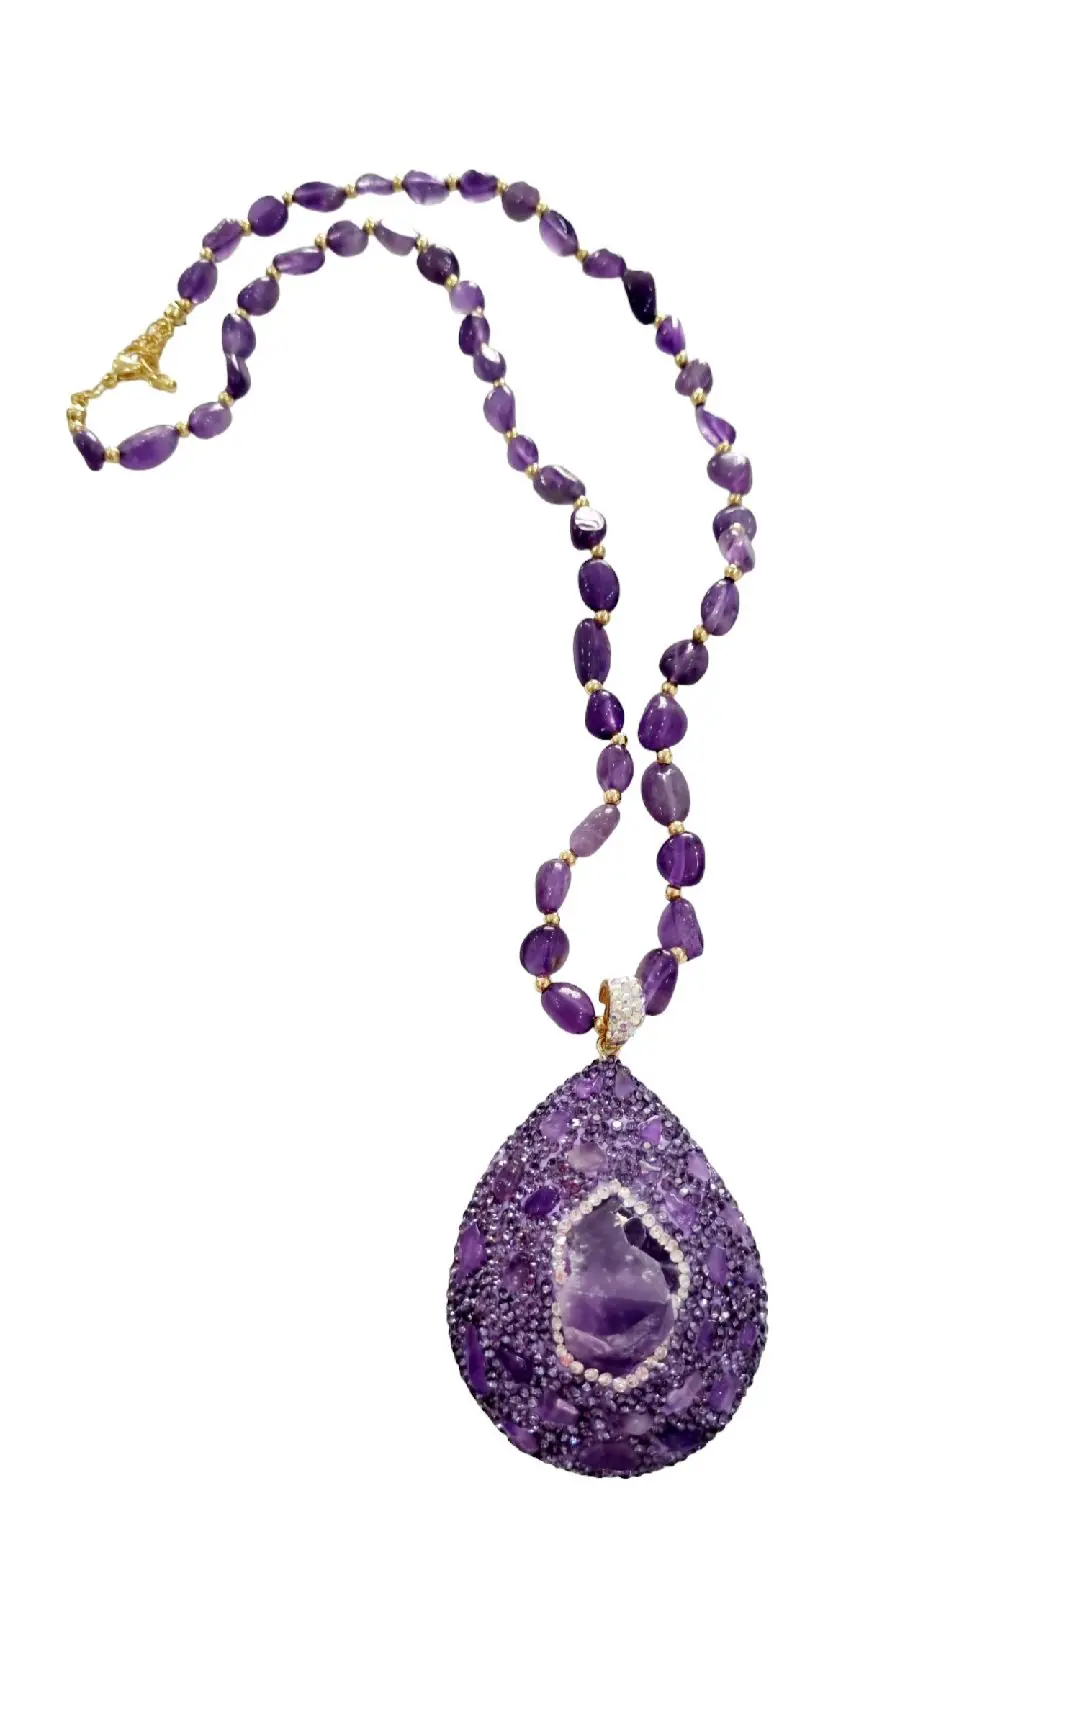 Set: adjustable choker necklace with pendant, earrings and adjustable ring made with amethyst,marcasite, hematite and leather. Necklace length 60cm Pendant length 7cm Earring length 4.5cm Earring weight 10gr